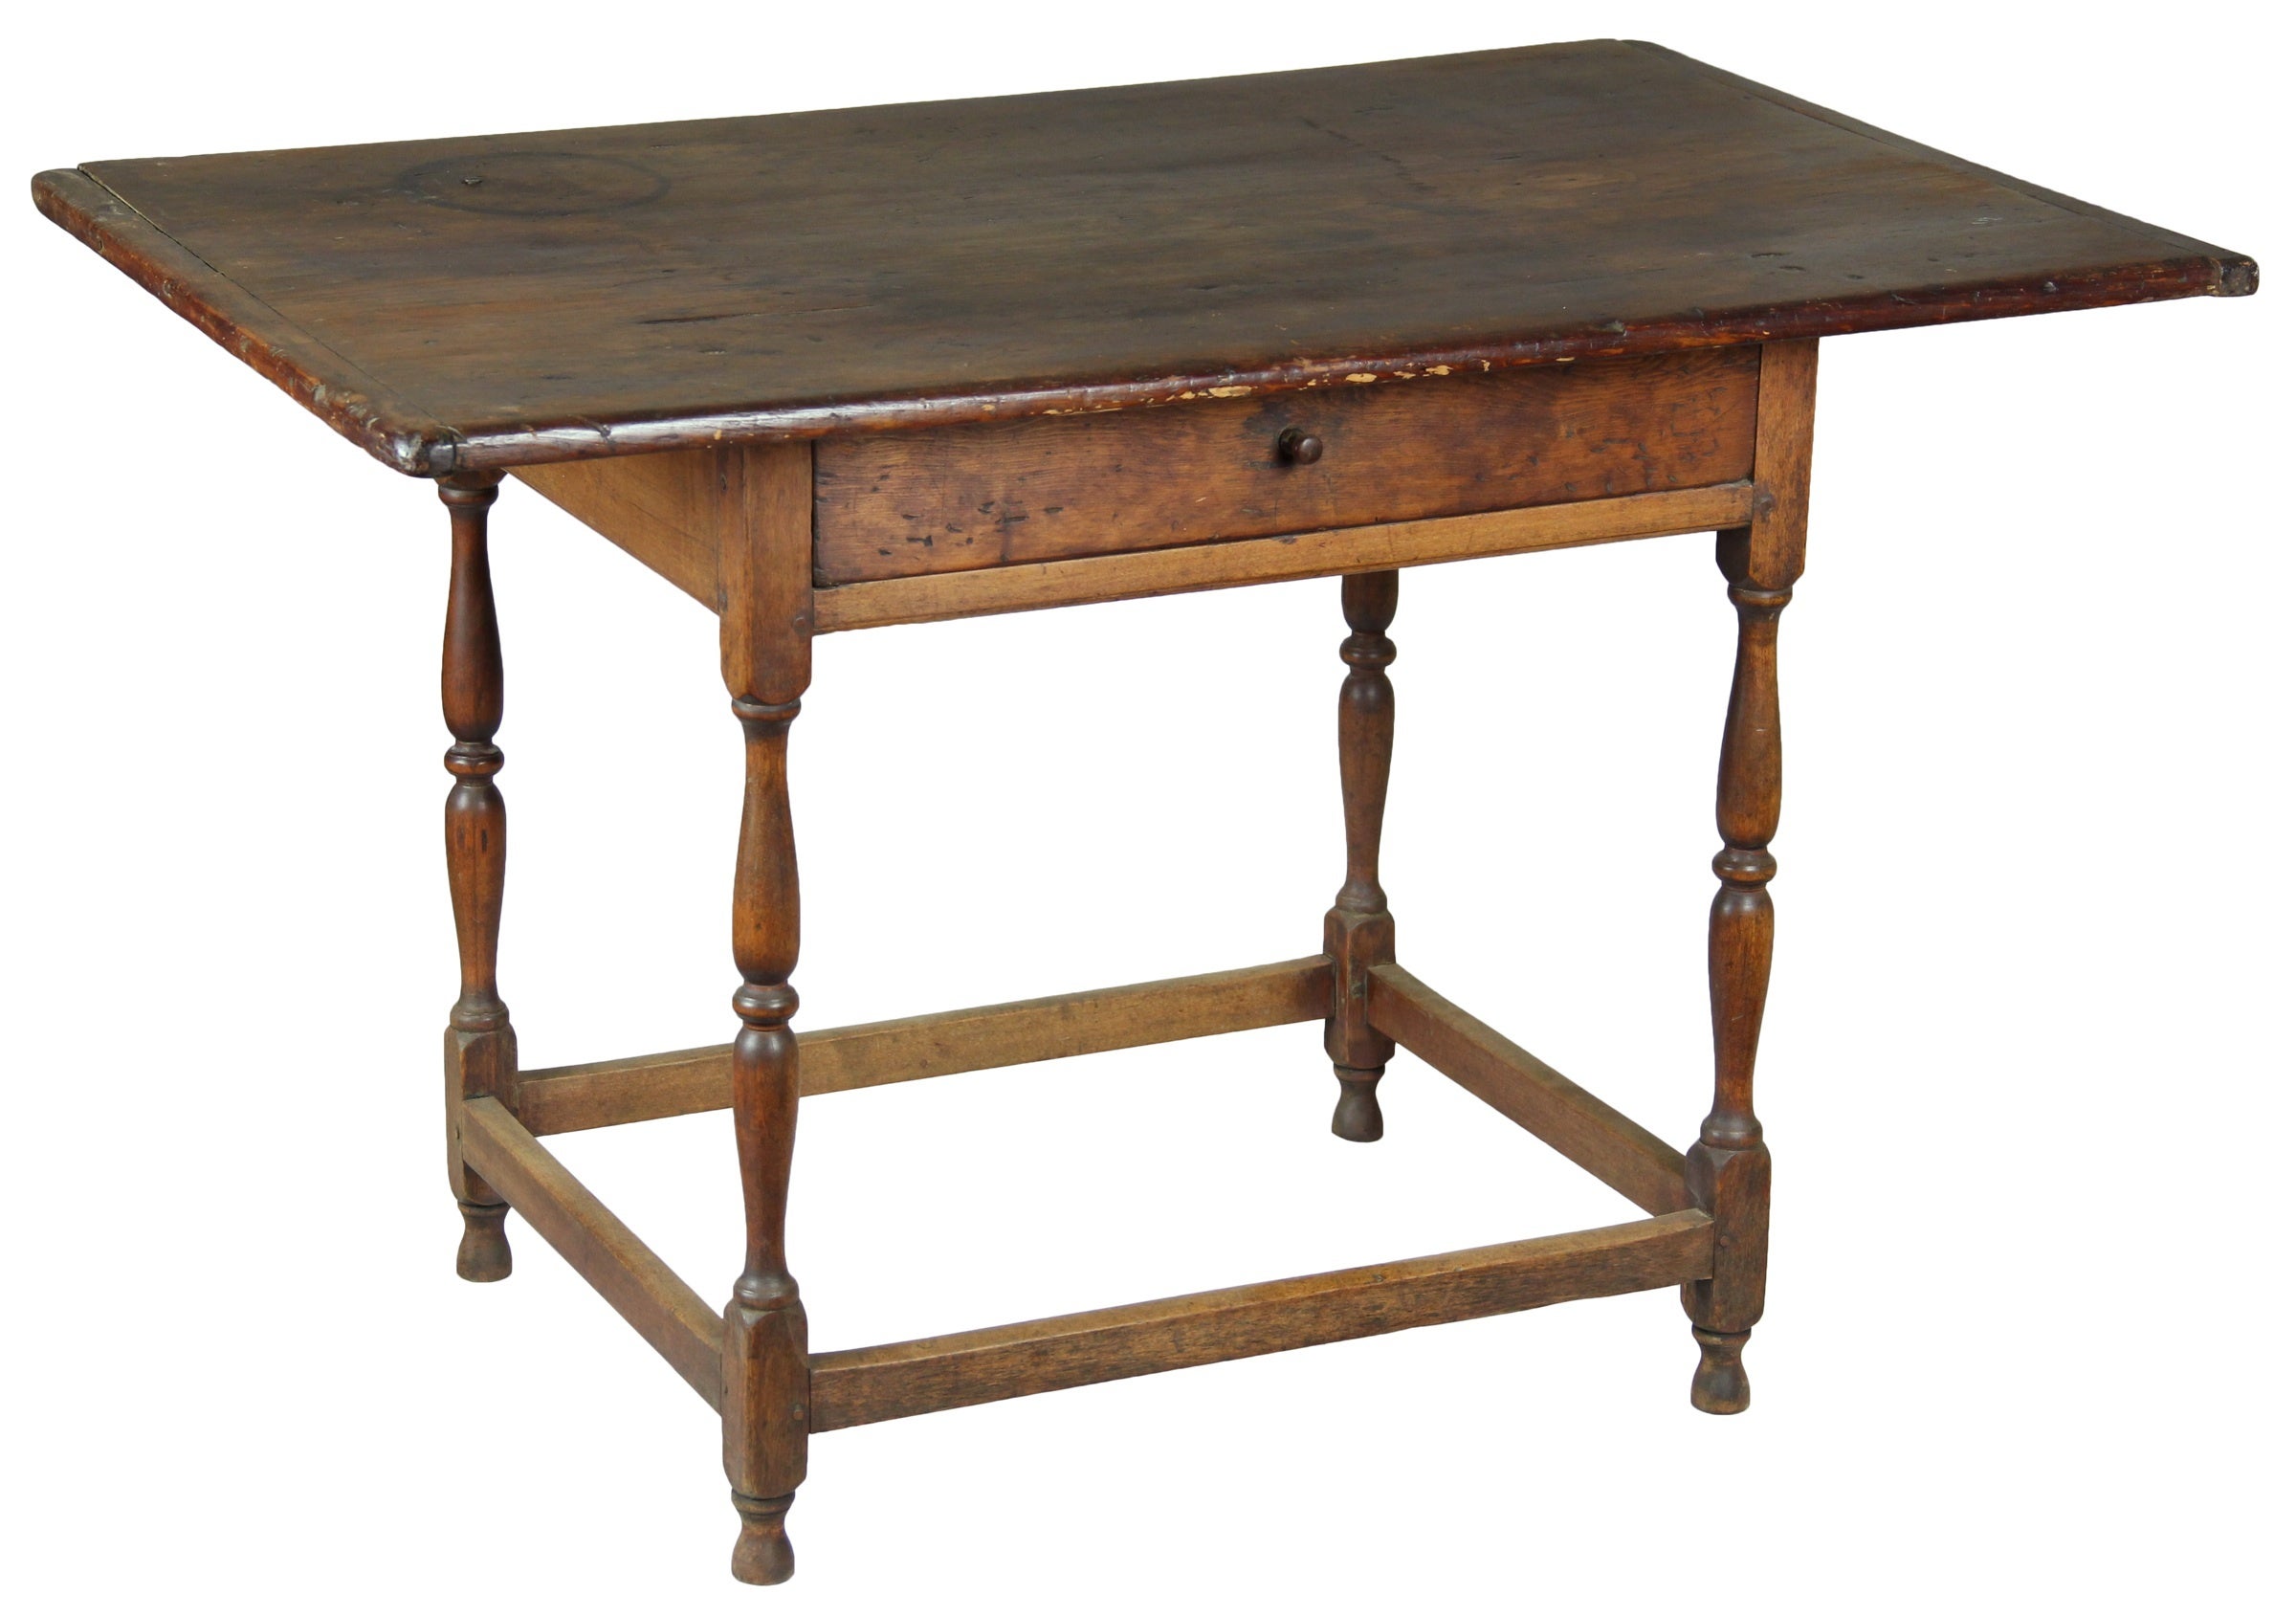 Turned Maple and Pine Tavern Table, New England, Mid-18th Century